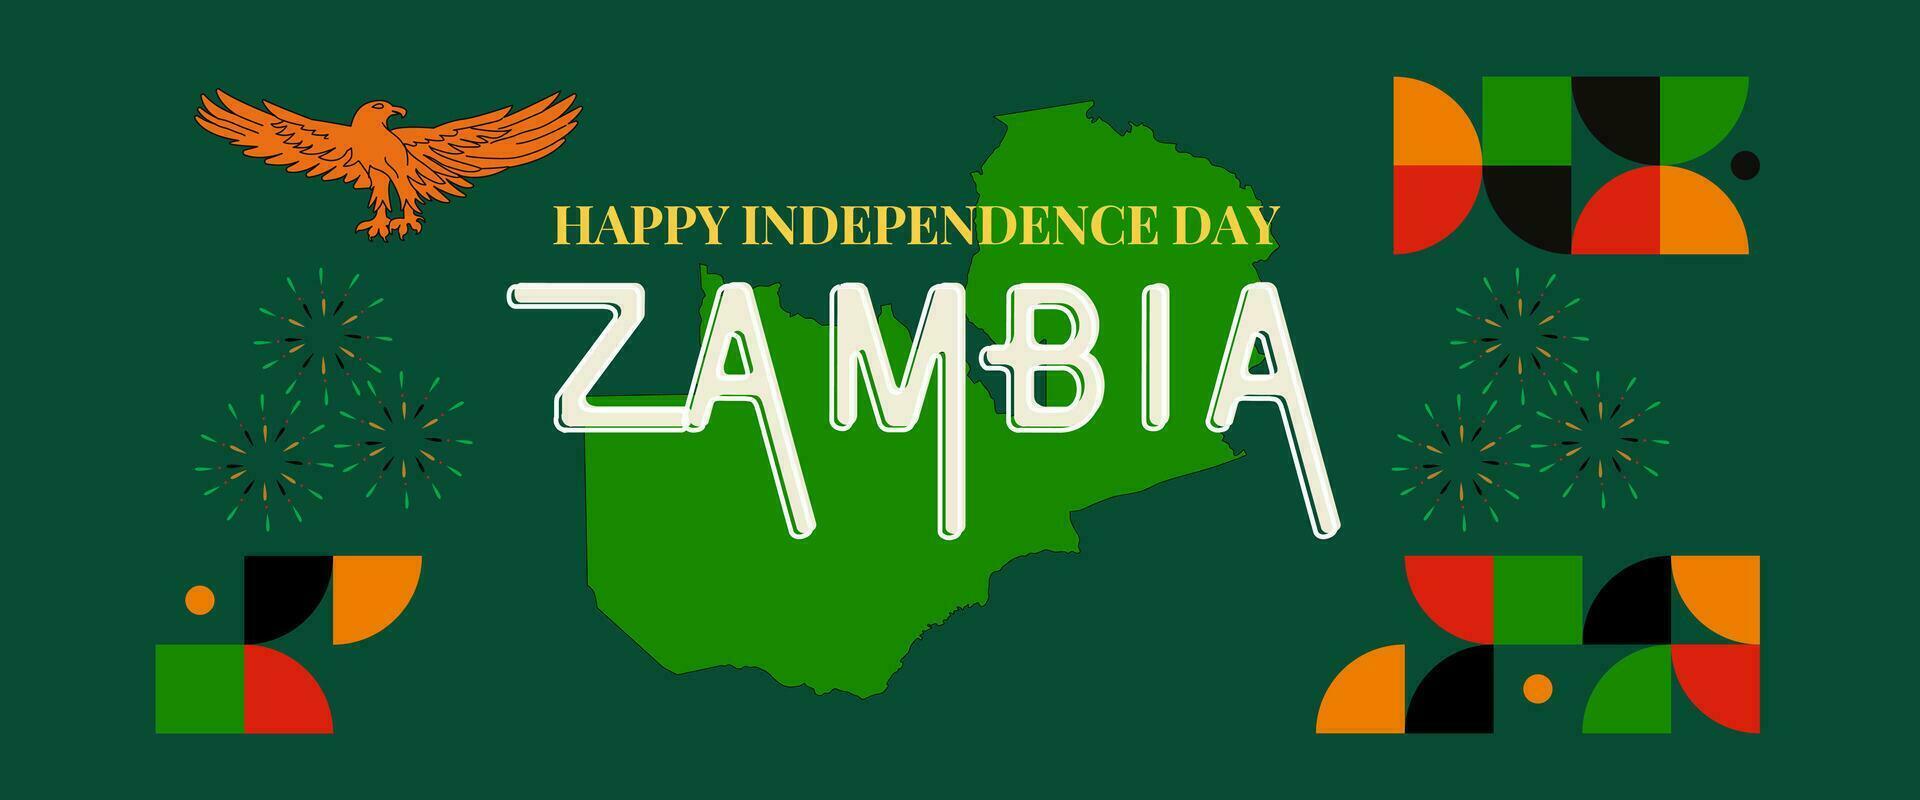 Zambia national day banner for independence day anniversary. Flag of Zambia and modern geometric retro abstract design. Green and black concept. vector